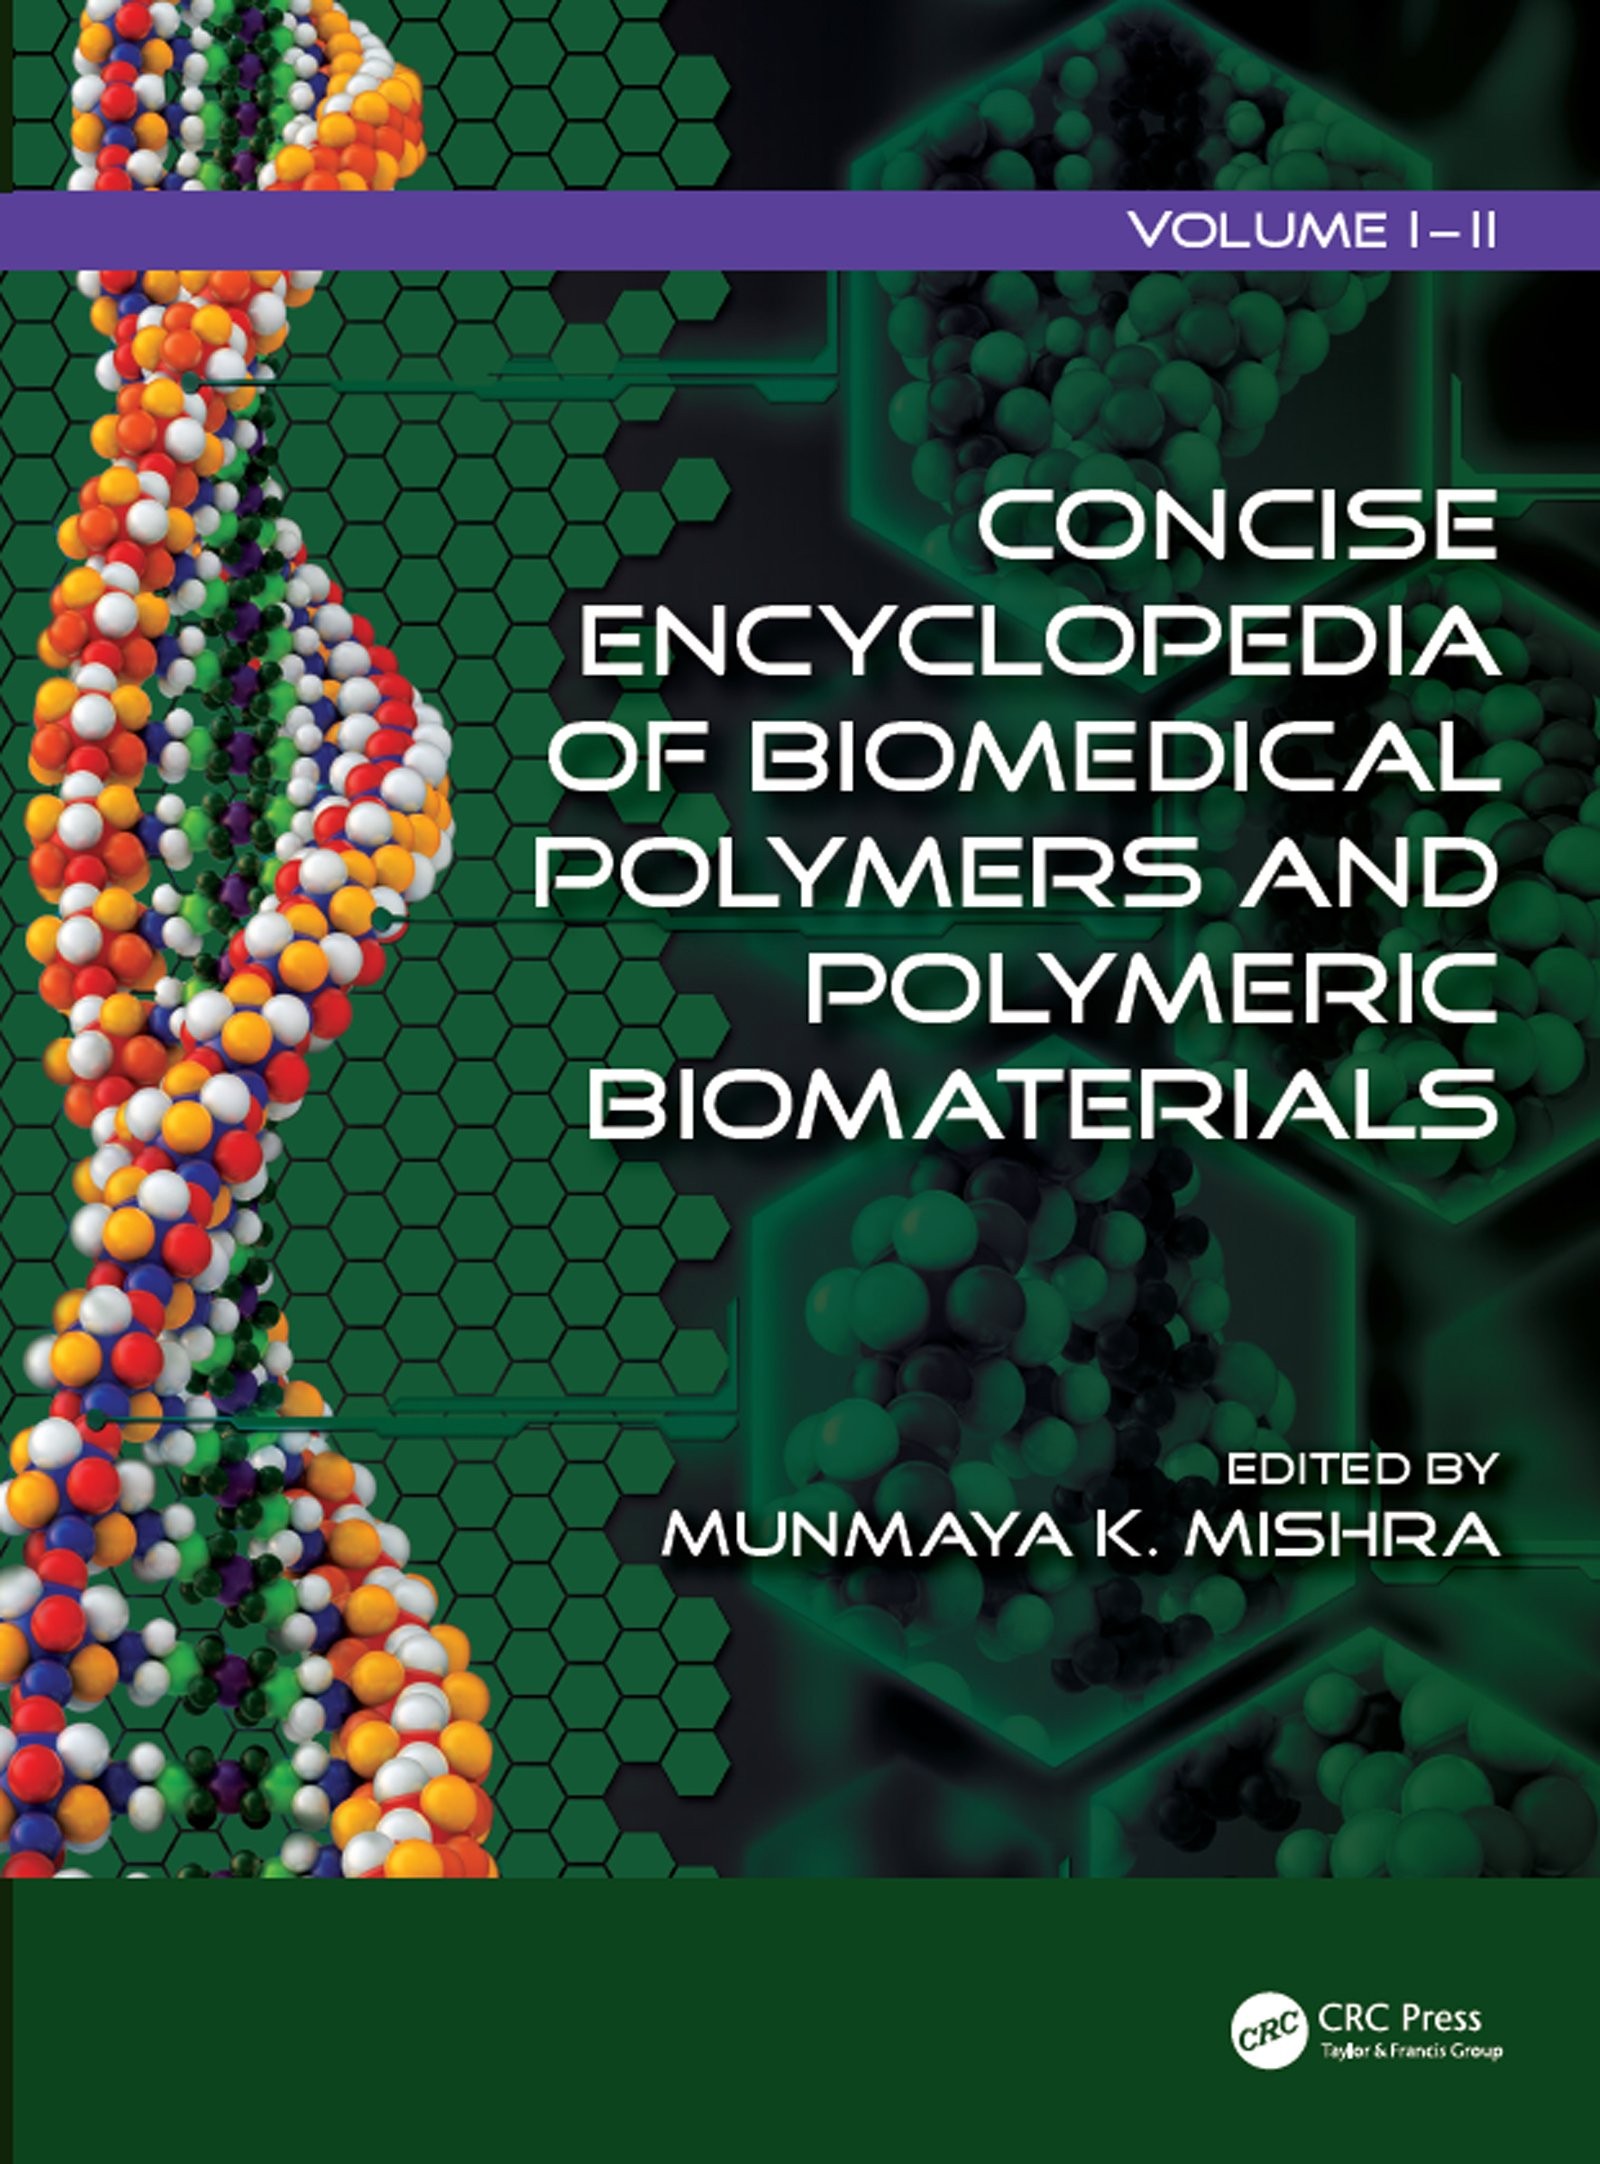 Concise Encyclopedia of Biomedical Polymers and Polymeric Biomaterials: Adhesives - Medical Devices and Preparative Medicine. Vol. 1